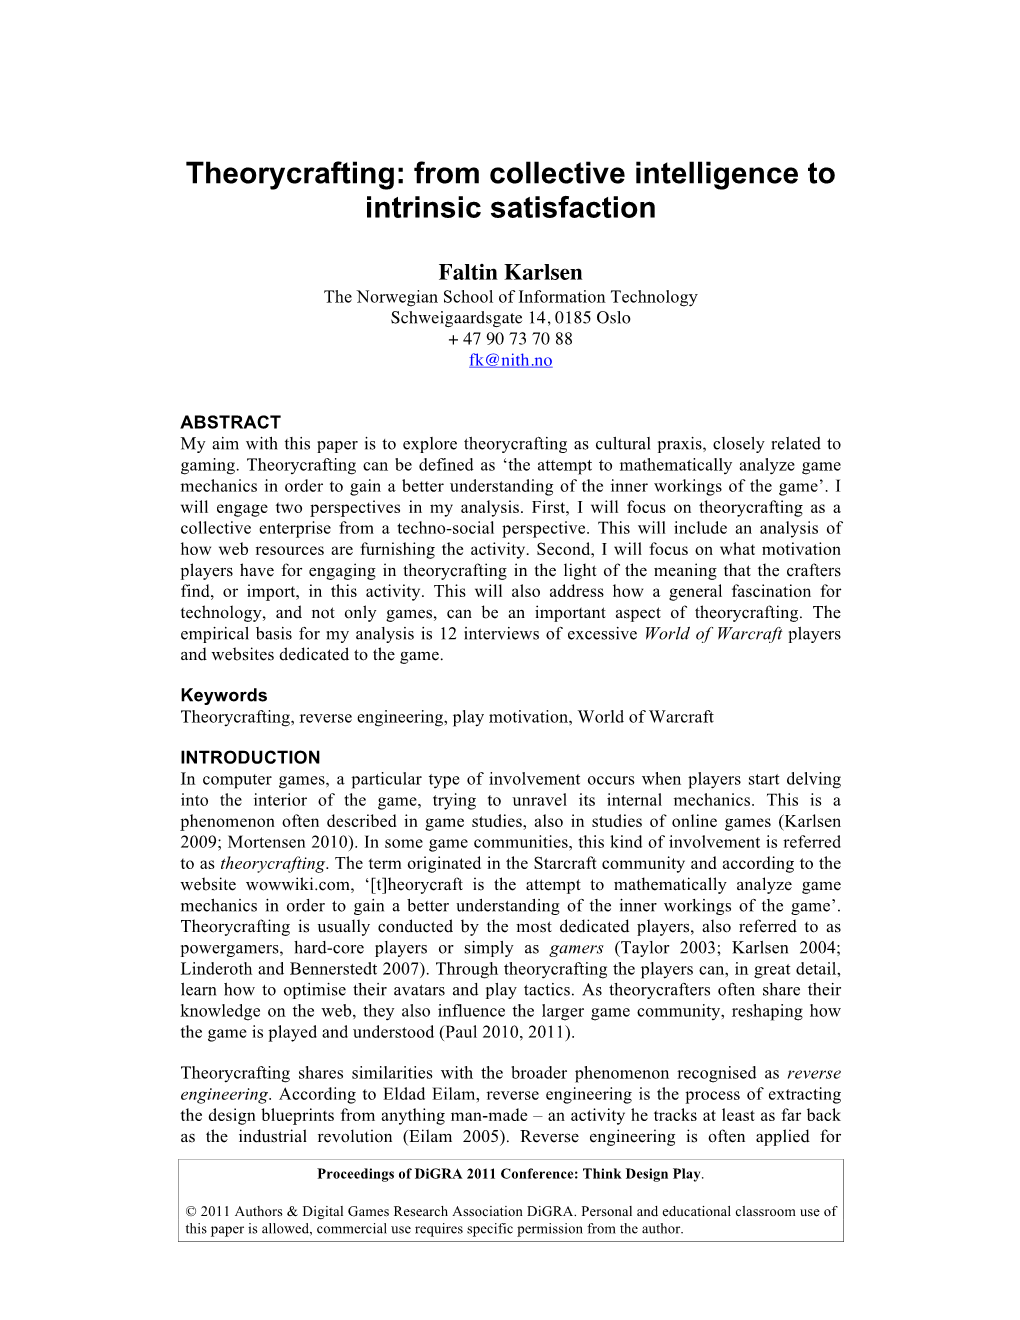 Theorycrafting: from Collective Intelligence to Intrinsic Satisfaction